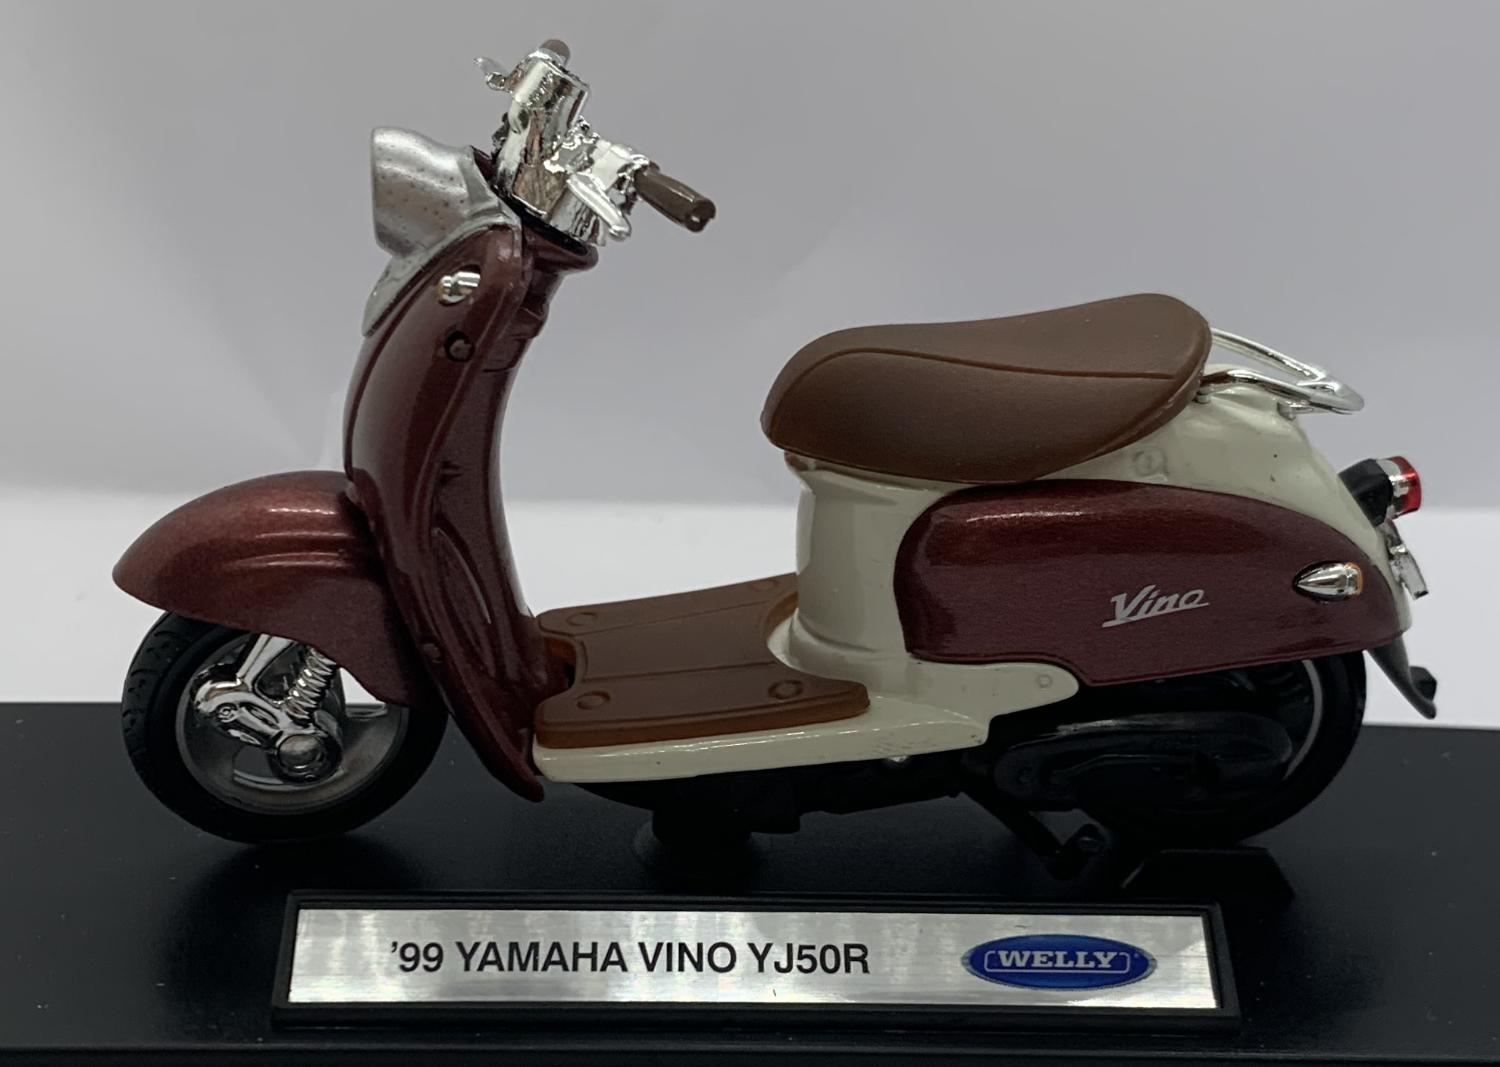 Yamaha Vino YJ50R 1999 in brown - copper & cream 1:18 scale welly model scooter